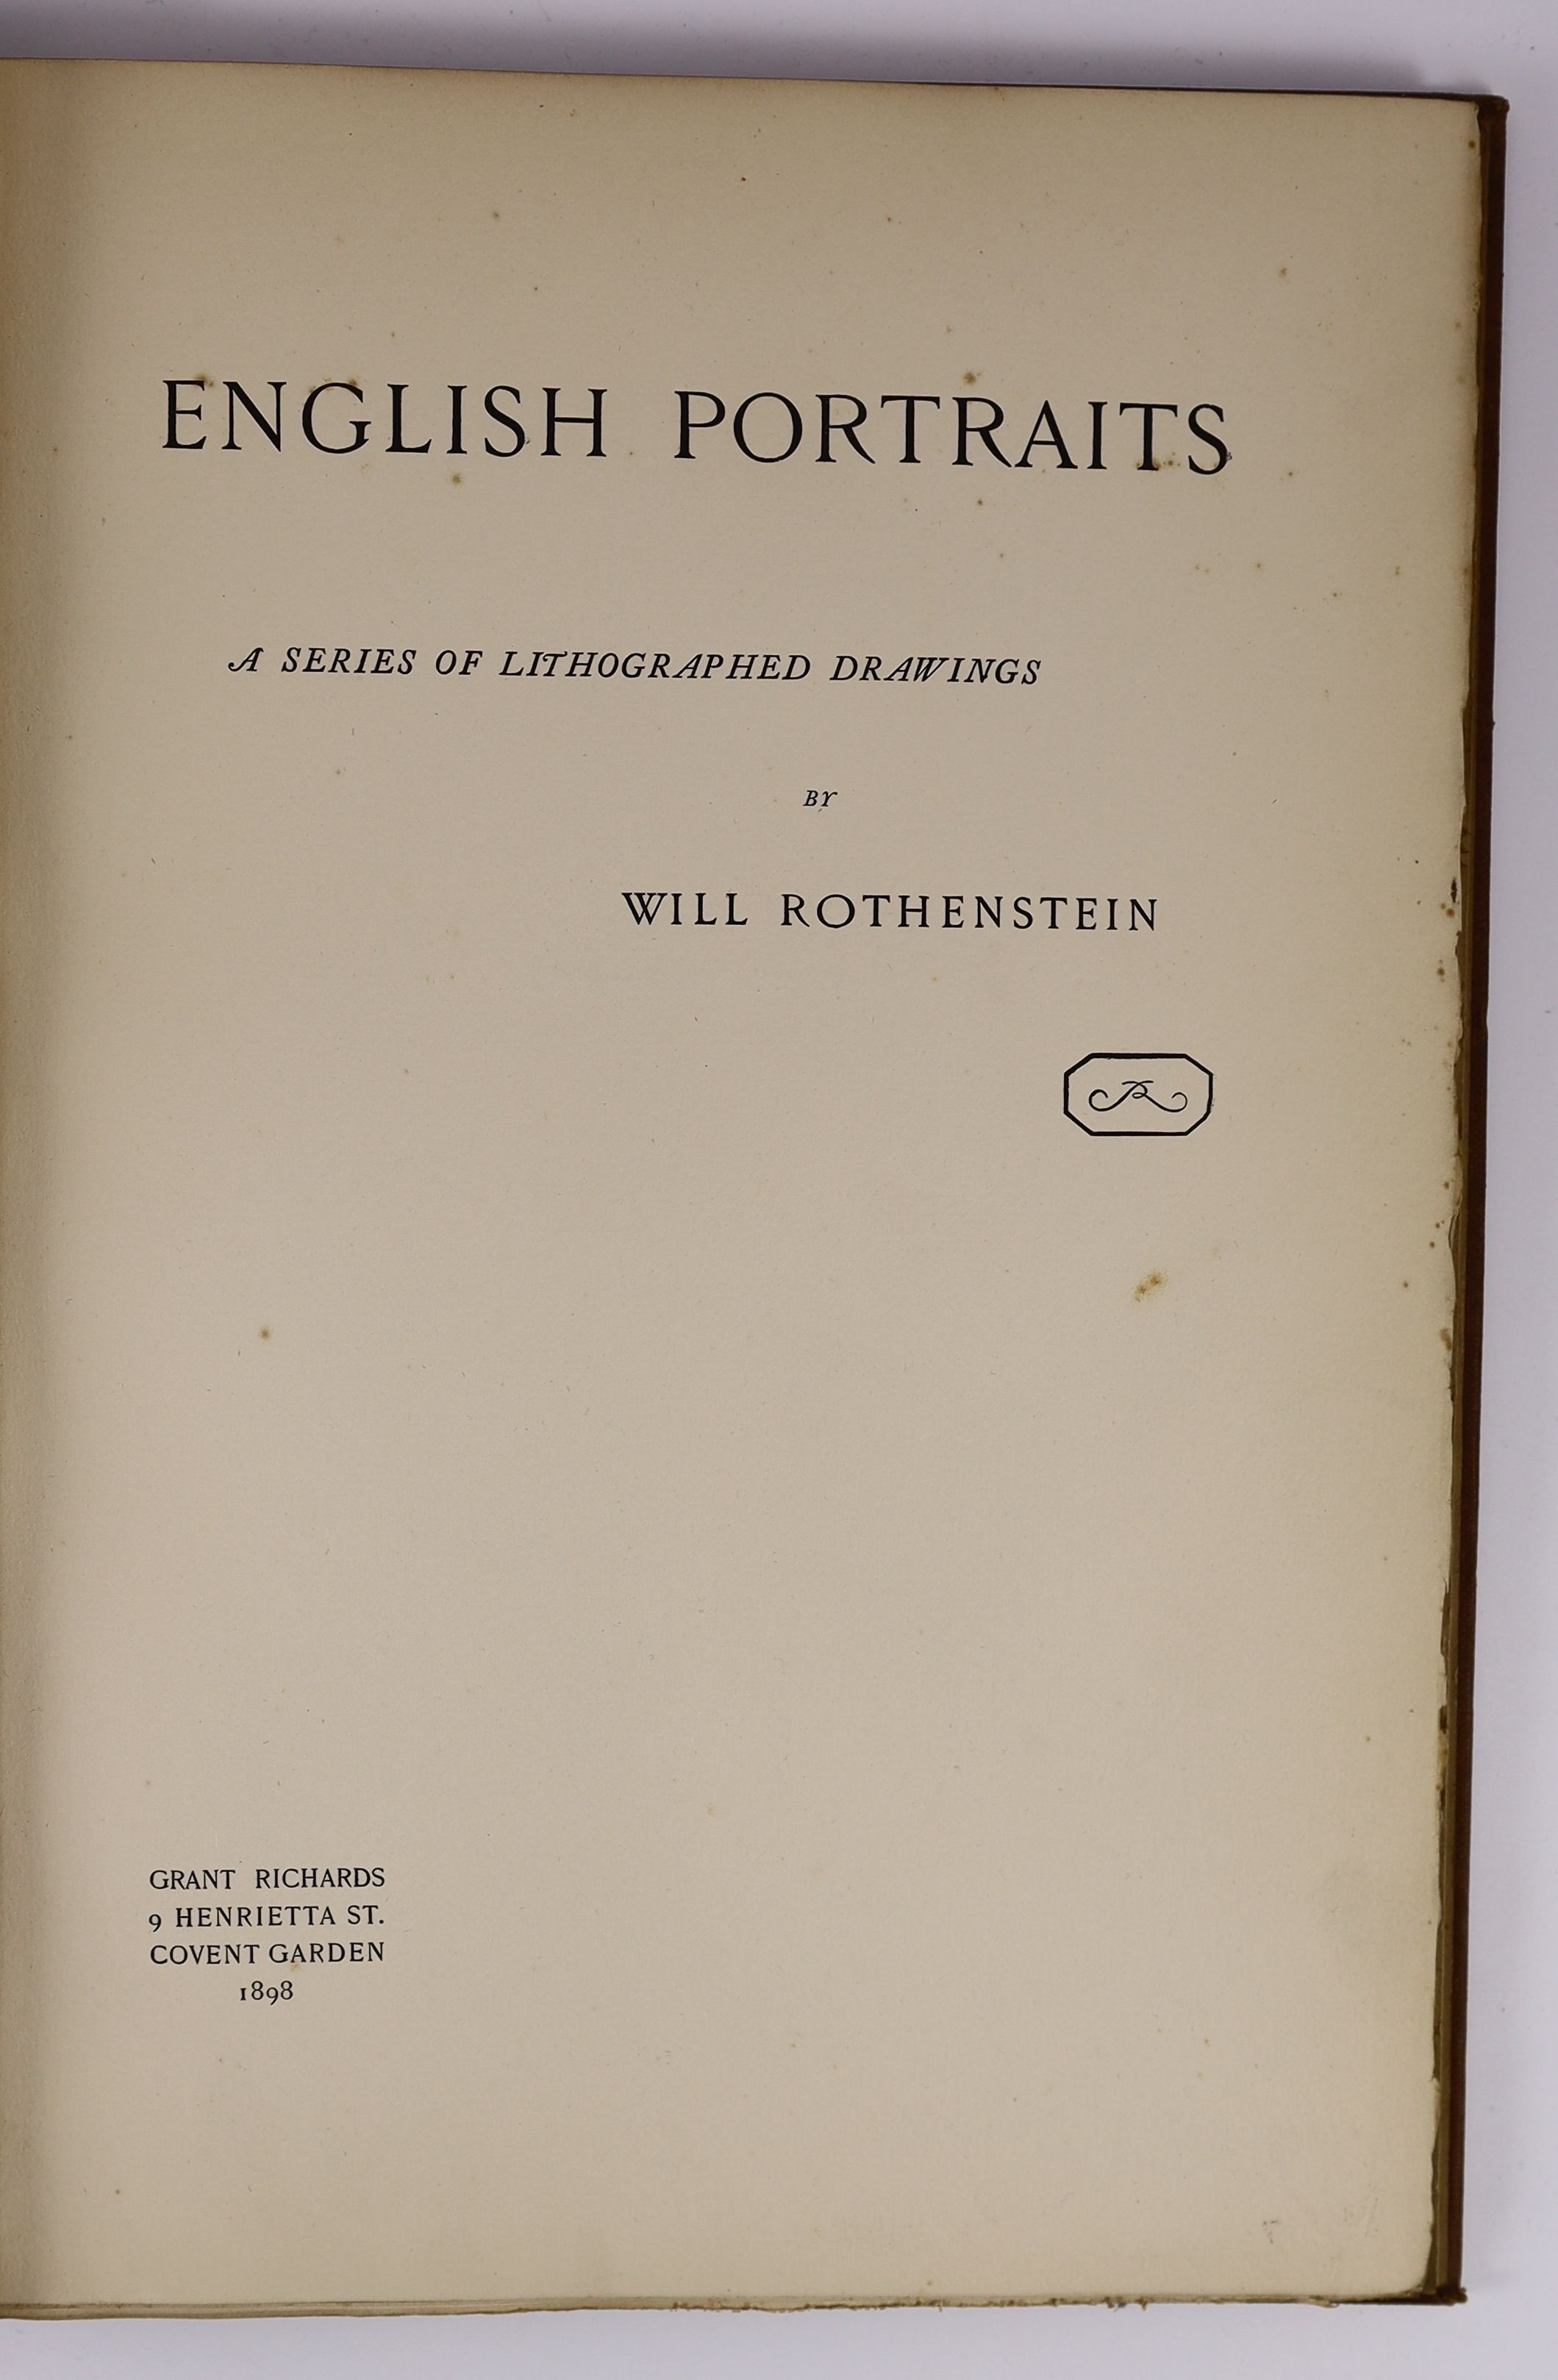 Rothenstein, William - English Portraits, a series of Lithographed Drawings - limited ed. one of 750. Complete with 24 illustrated plates, limitation and dedication page. Cloth with gilt letters direct on upper and spine